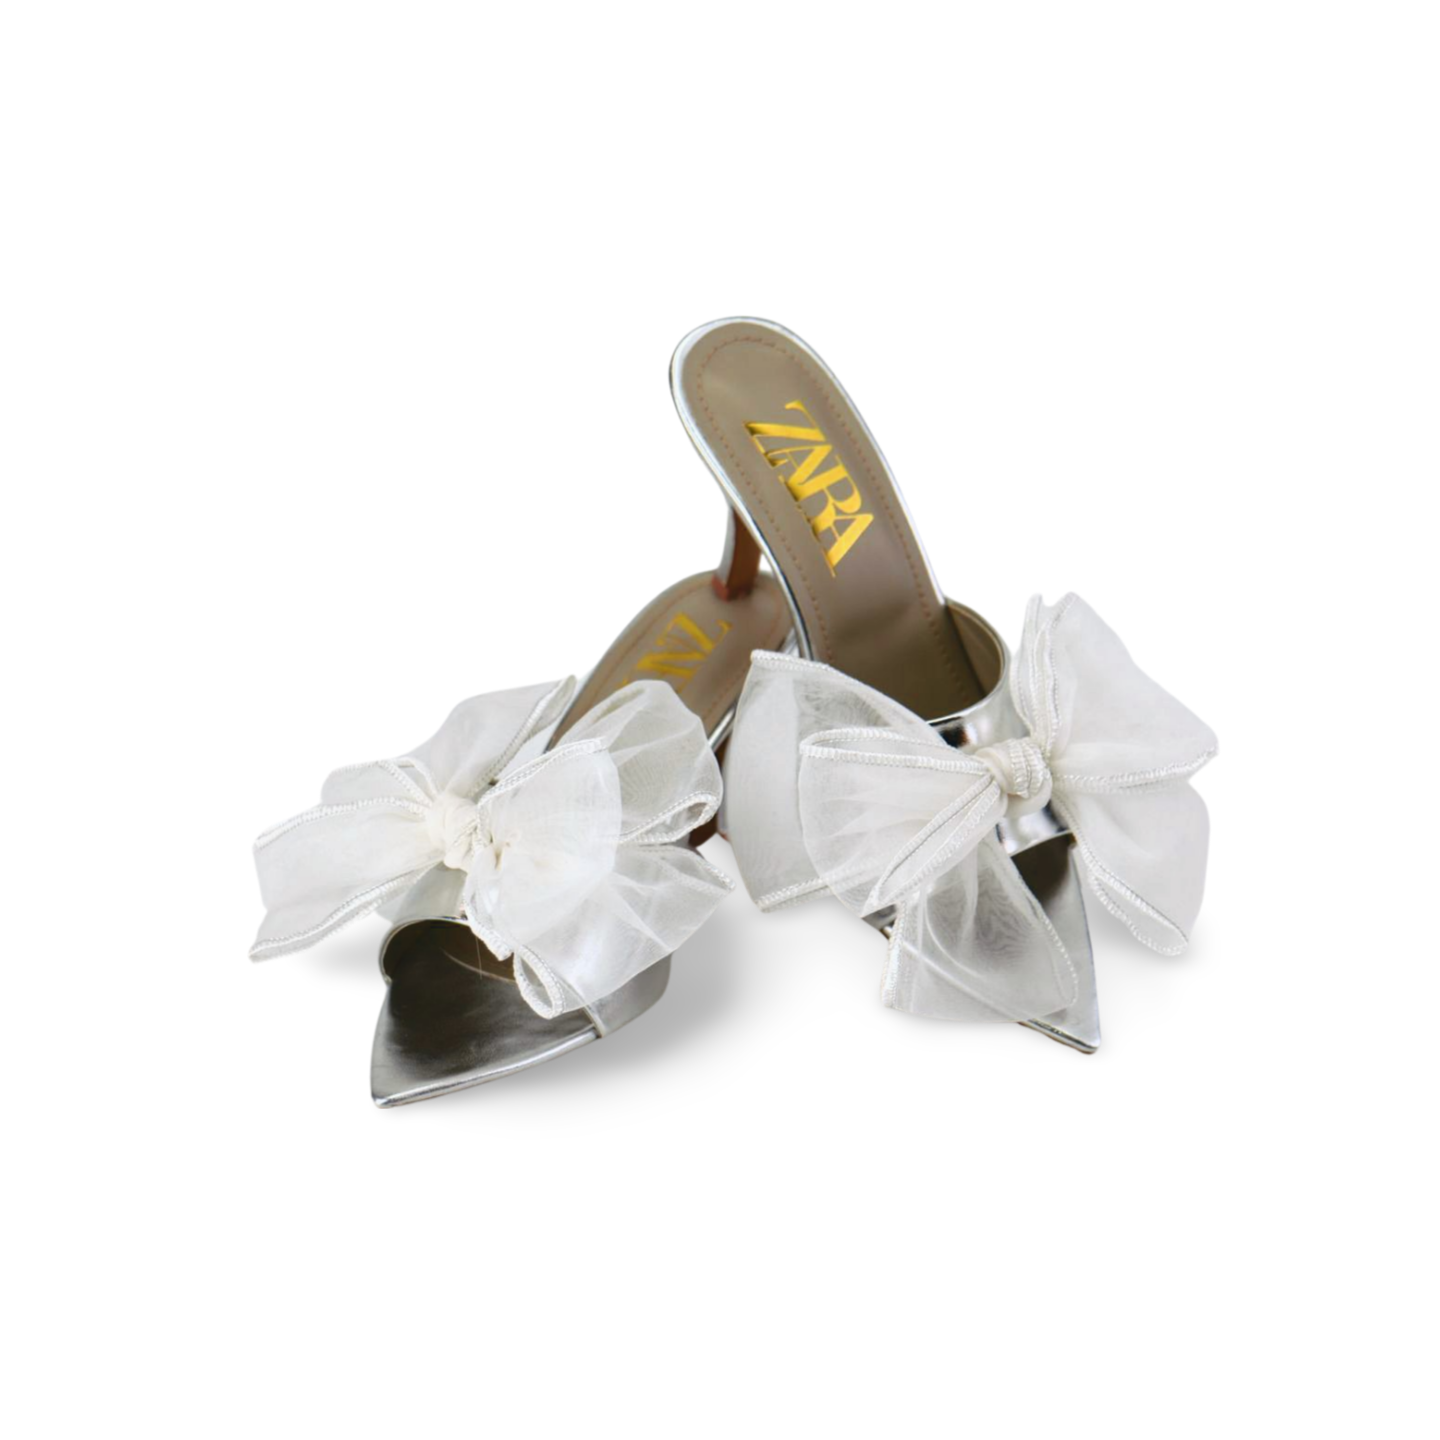 Stylish Mules with Satin Ribbon Bow for Women - Elegant and Comfortable Shoes for Any Occasion